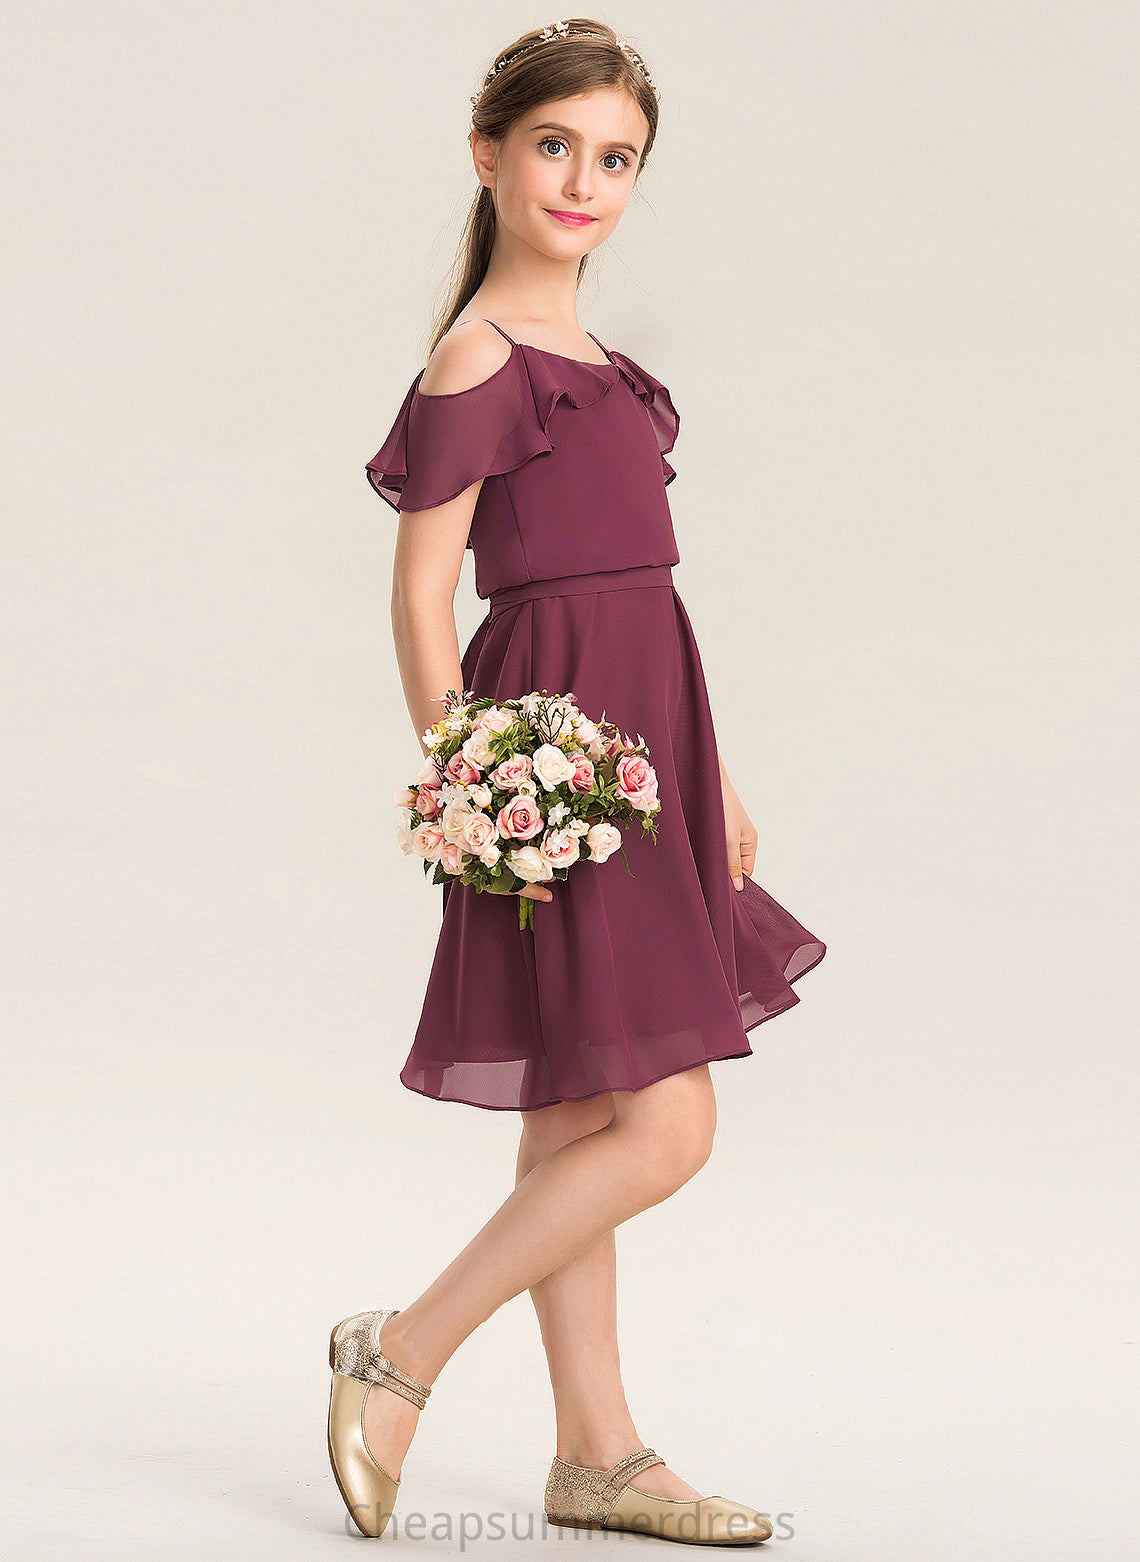 Ruffles Cascading Chiffon Kaylin Off-the-Shoulder Junior Bridesmaid Dresses Bow(s) A-Line With Knee-Length